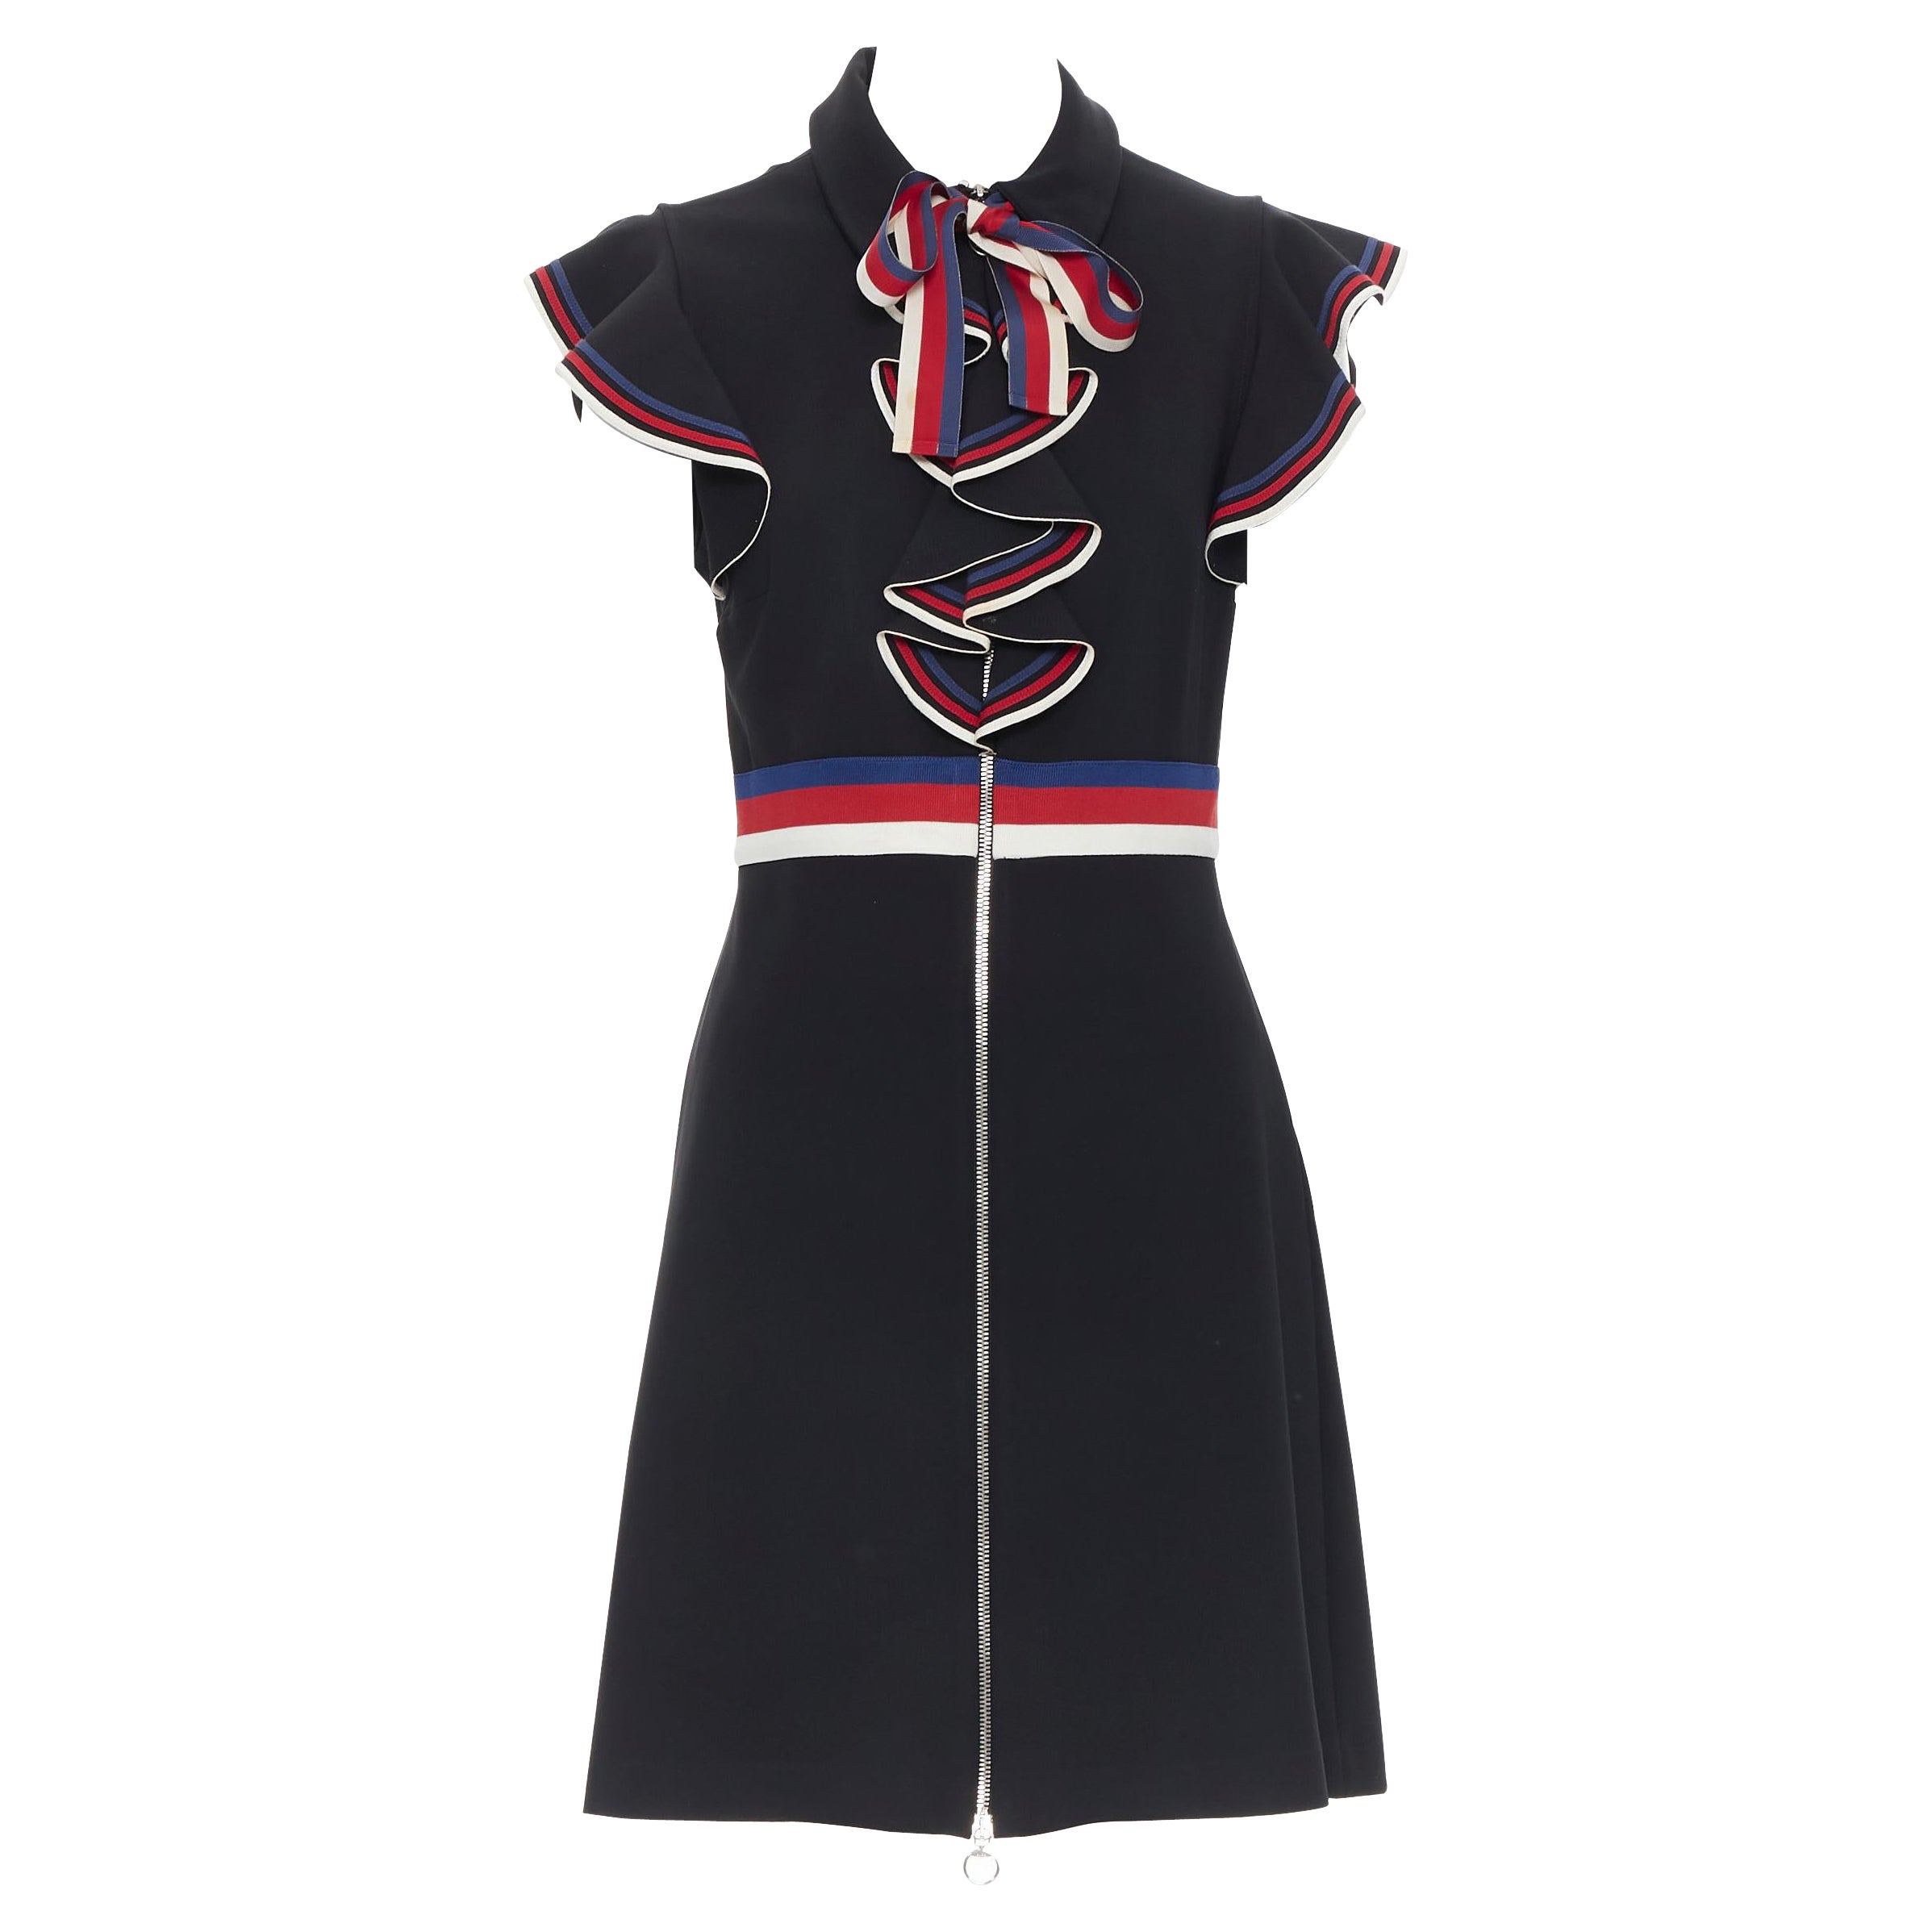 GUCCI black blue red white web ribbon bow flutter sleeve cocktail dress XL